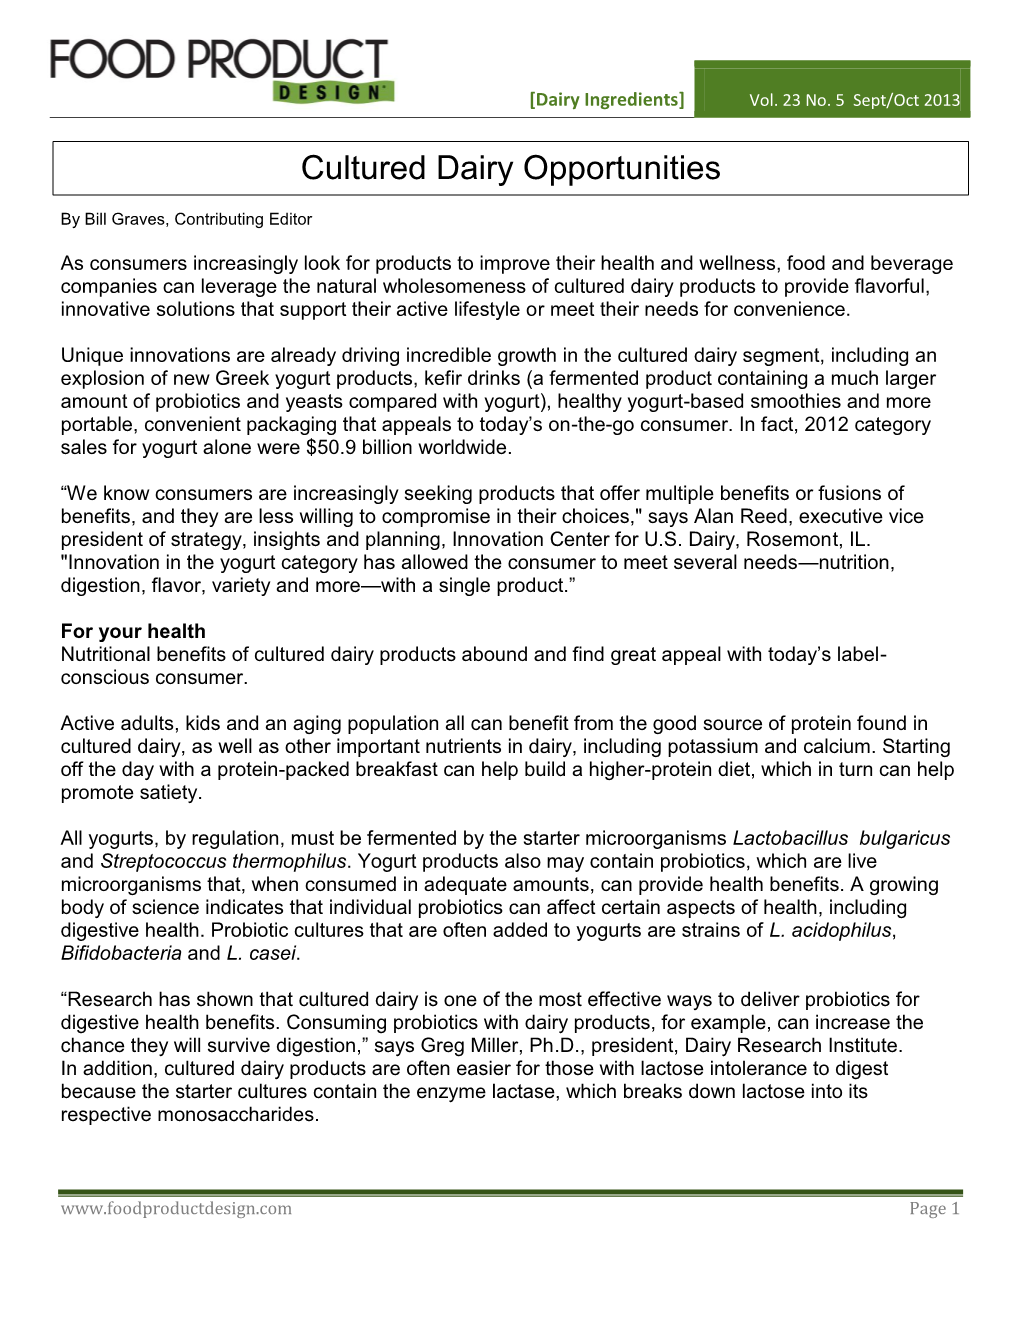 Cultured Dairy Opportunities